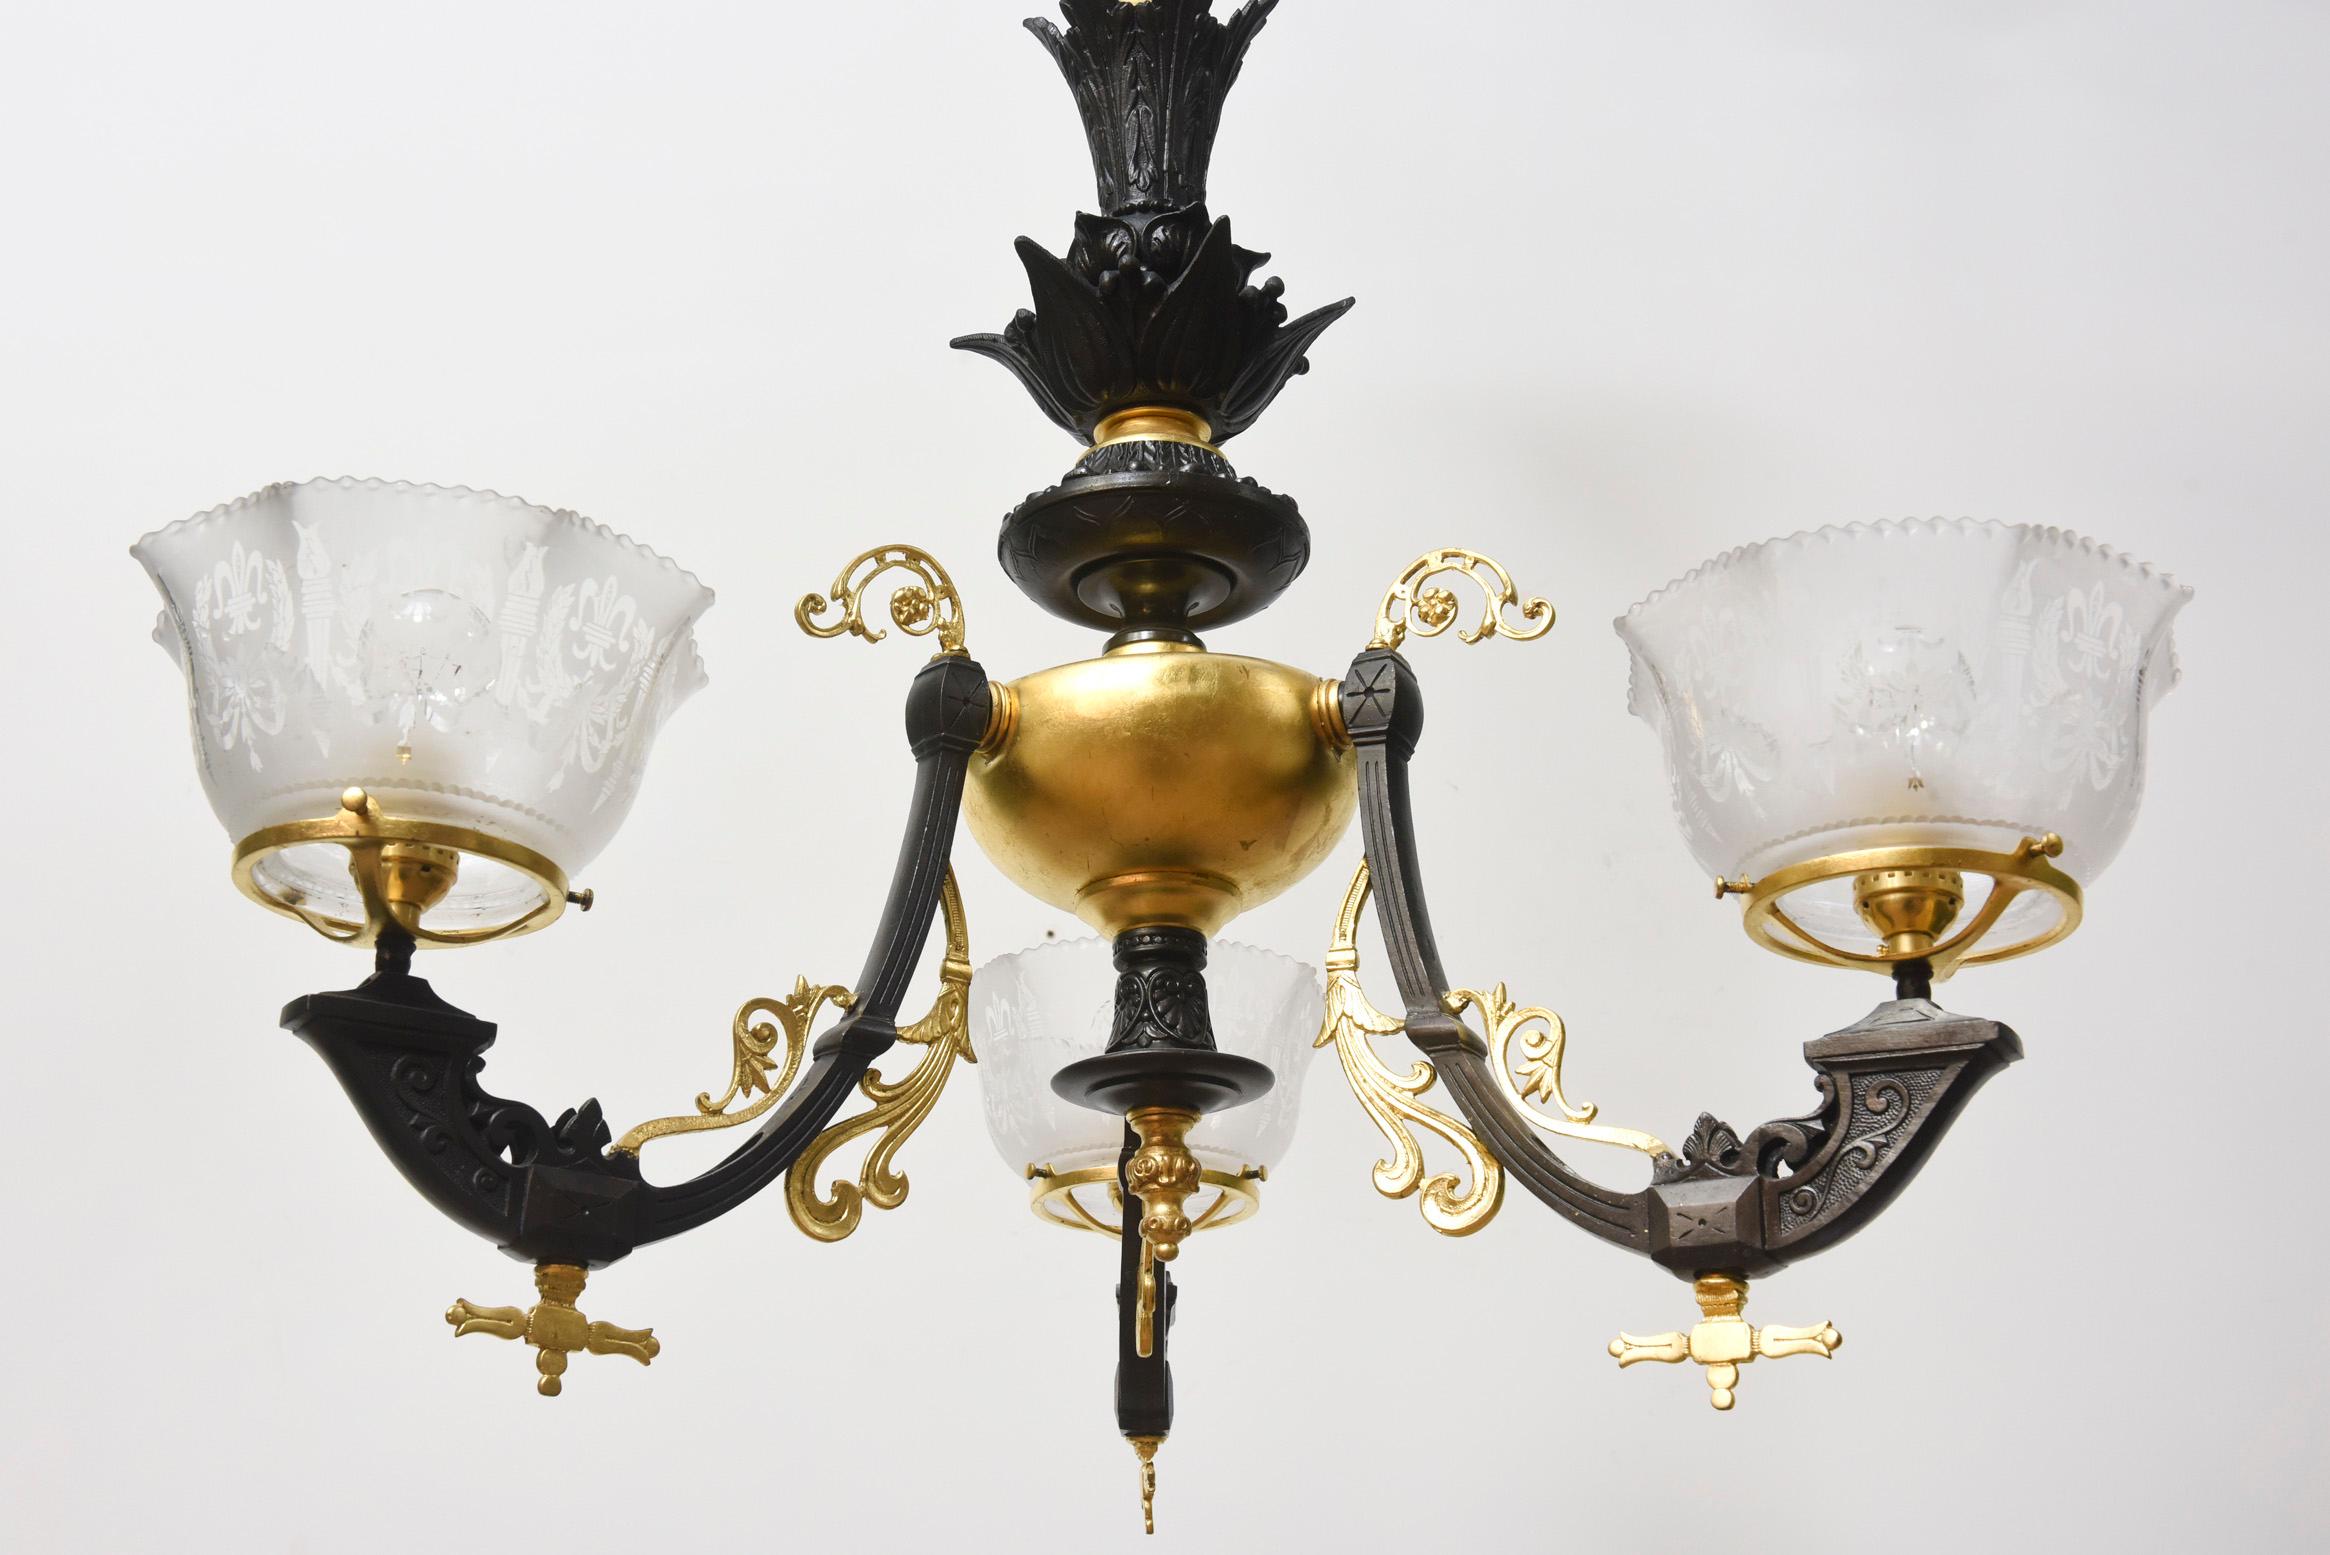 Eastlake Three Light Gas Fixture in Black and Gold In Excellent Condition For Sale In Canton, MA